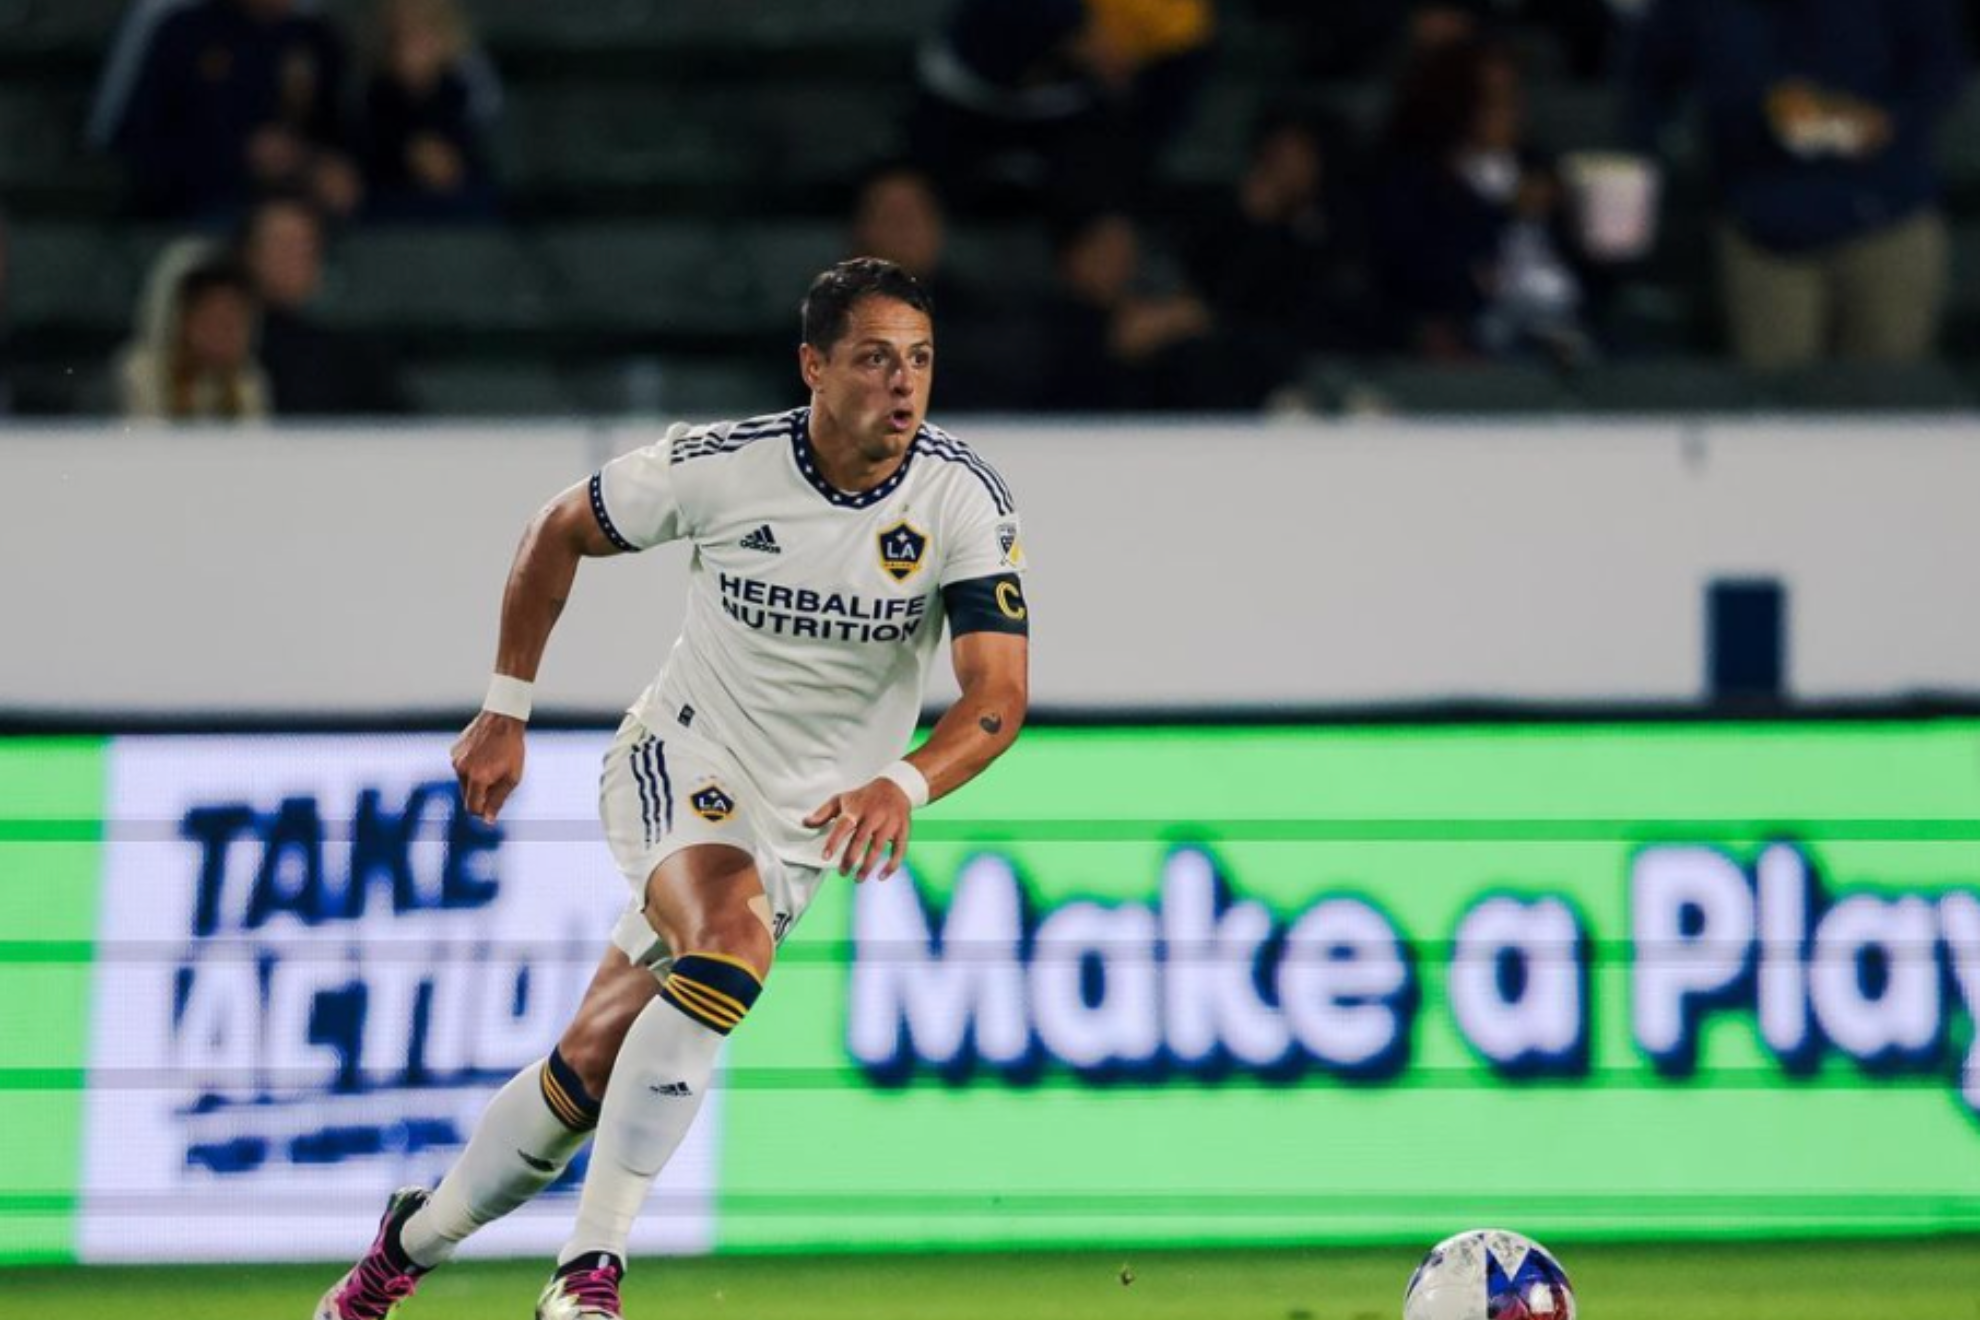 Chicharito is among the richest players in Major League Soccer, but does he top the list?